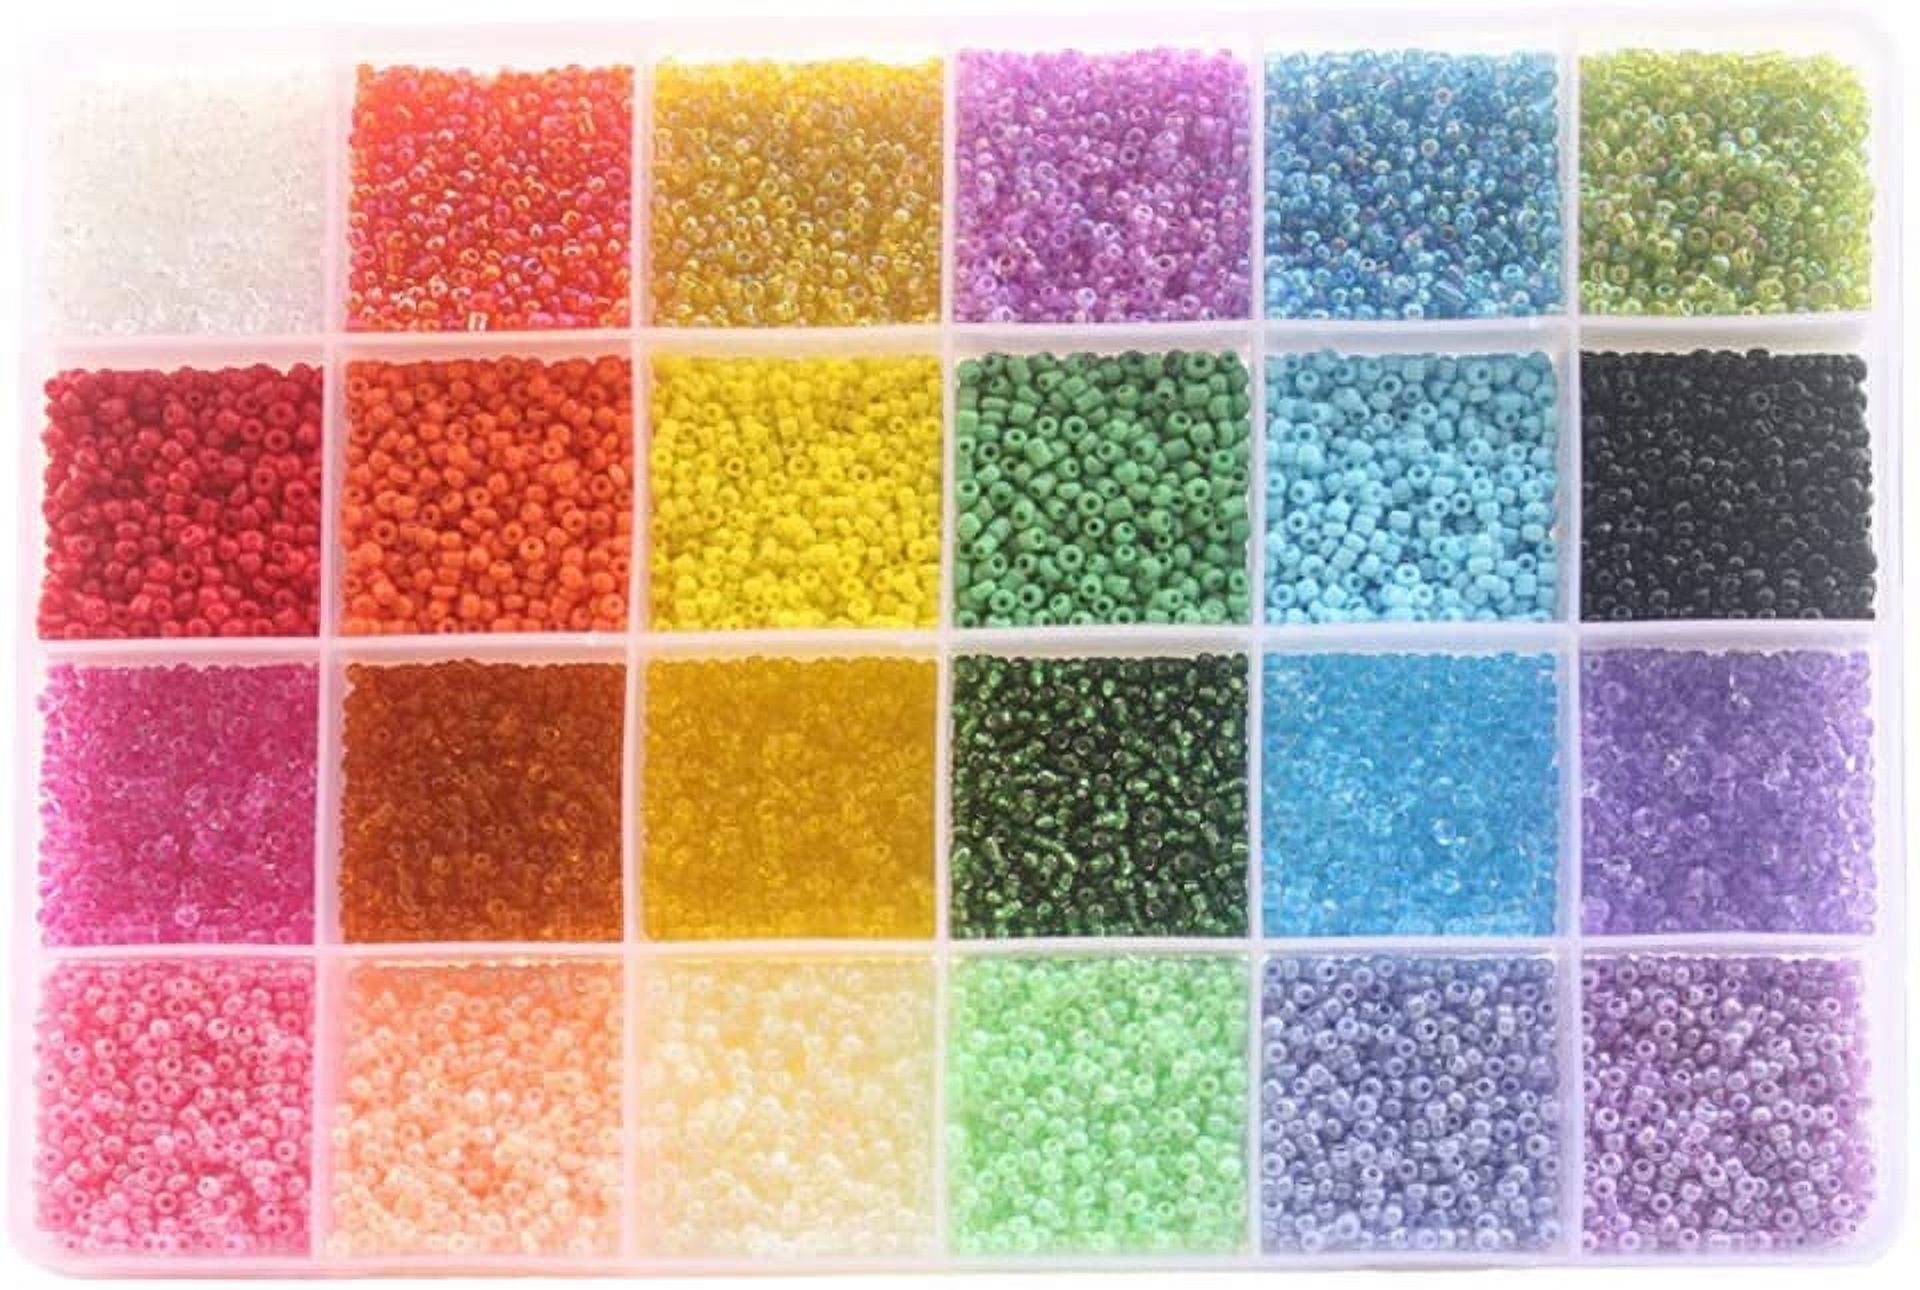 Haobase 24000 Pcs 2mm Glass Seed Beads, 24 Colors Small